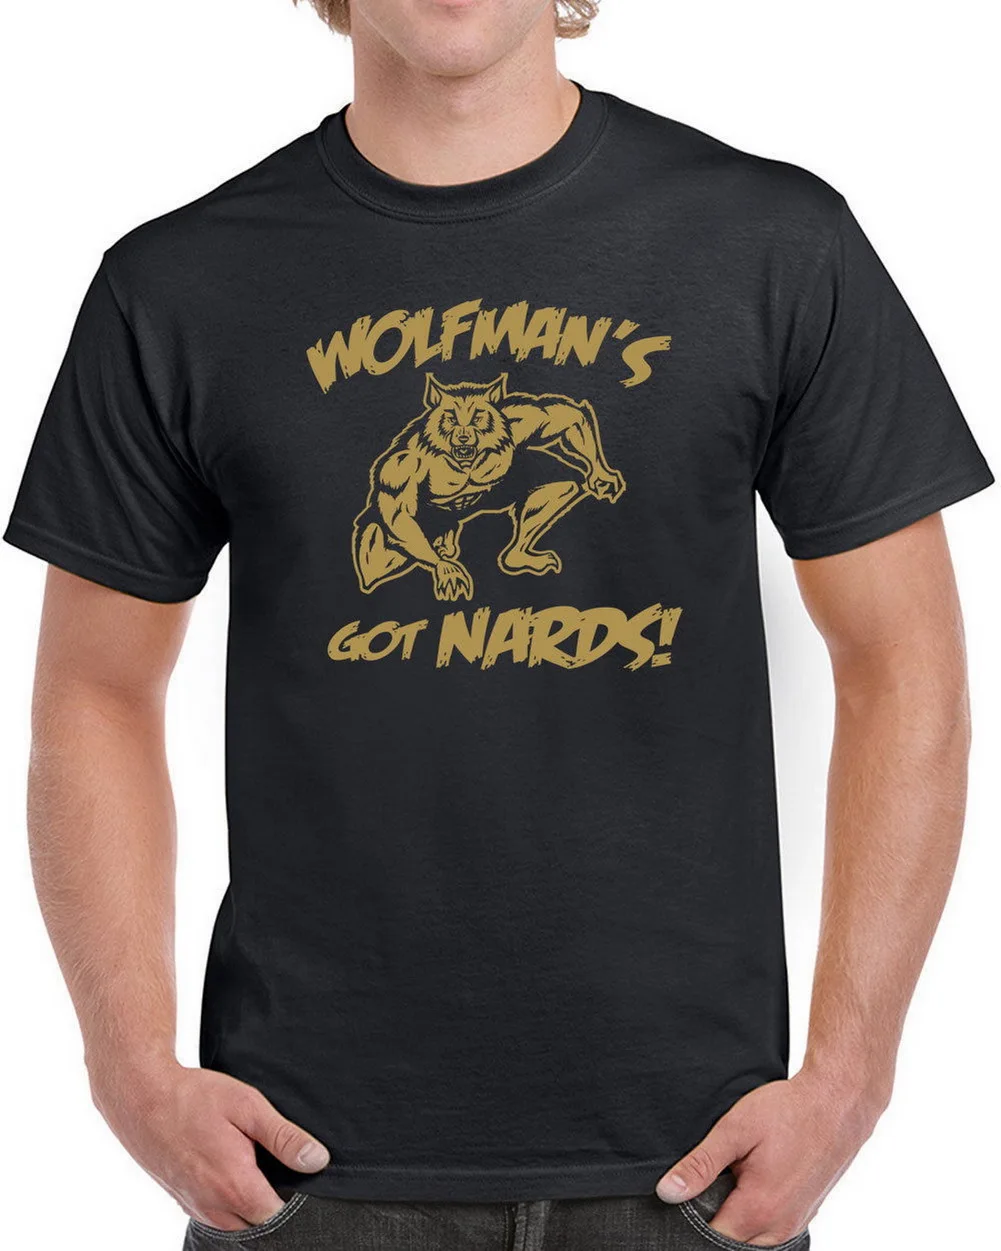 586 Wolfman's Got Nards Mens Tops Tee T Shirt Funny Monster 80s Movie ...